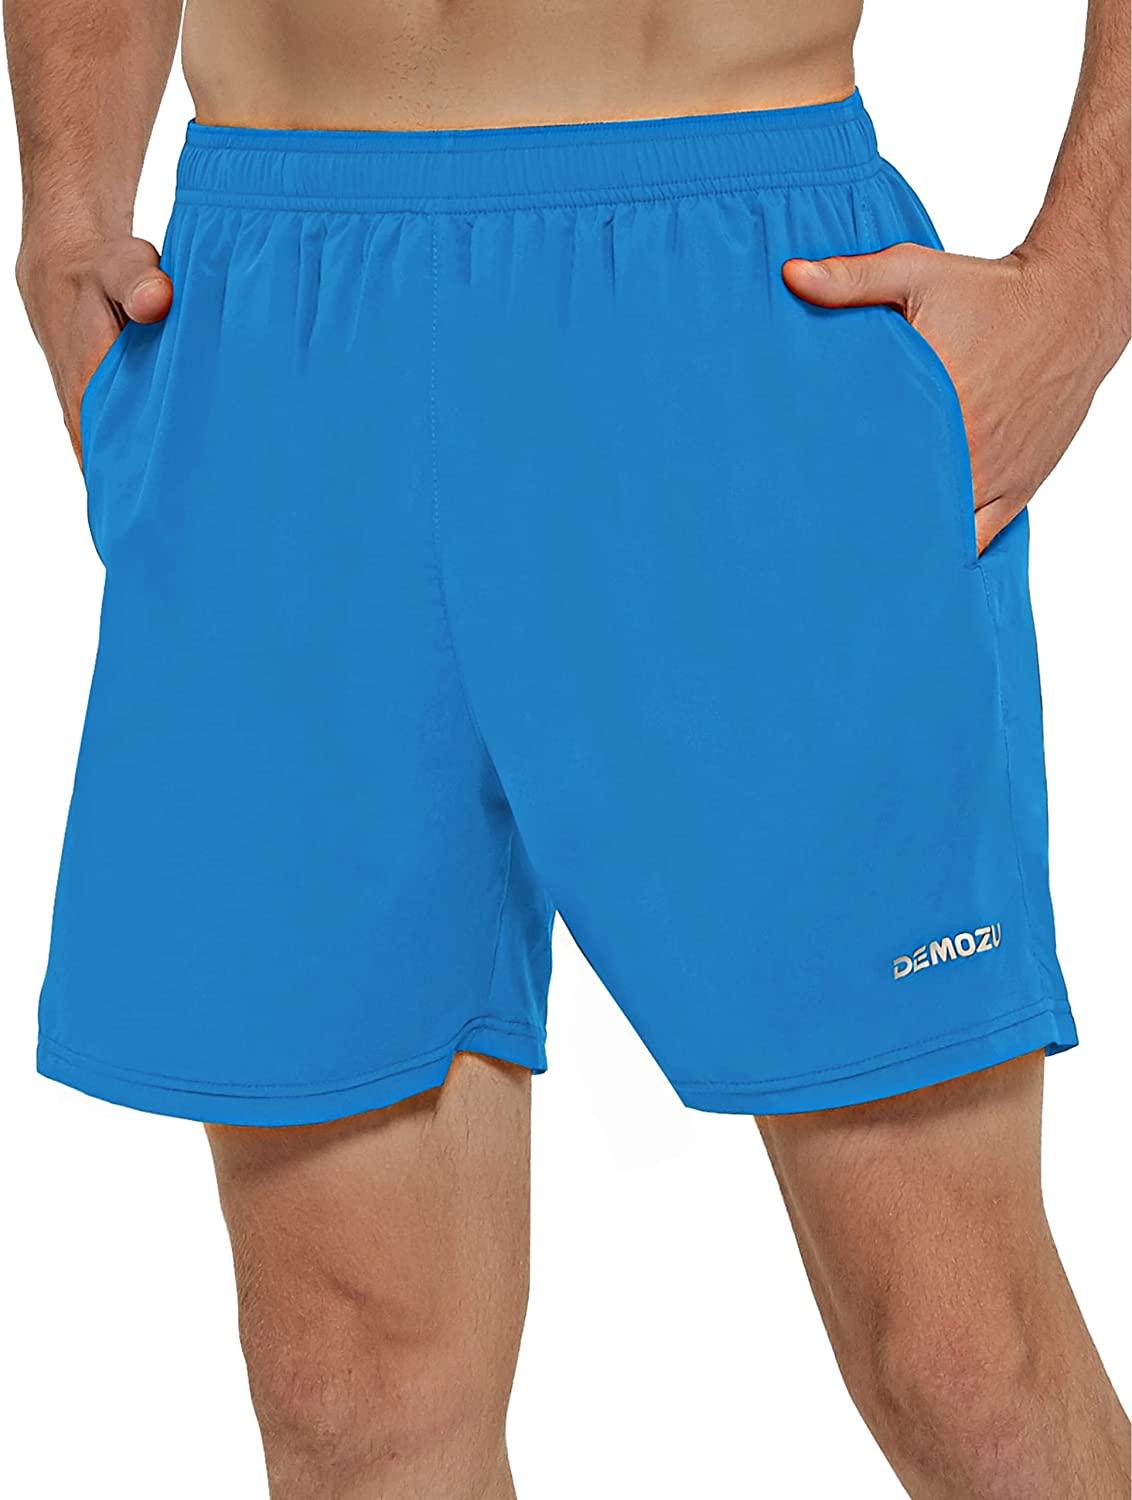 DEMOZU Men's 5 Inch Running Shorts Lightweight Quick Dry Athletic Tennis Workout Gym Shorts with Pockets 